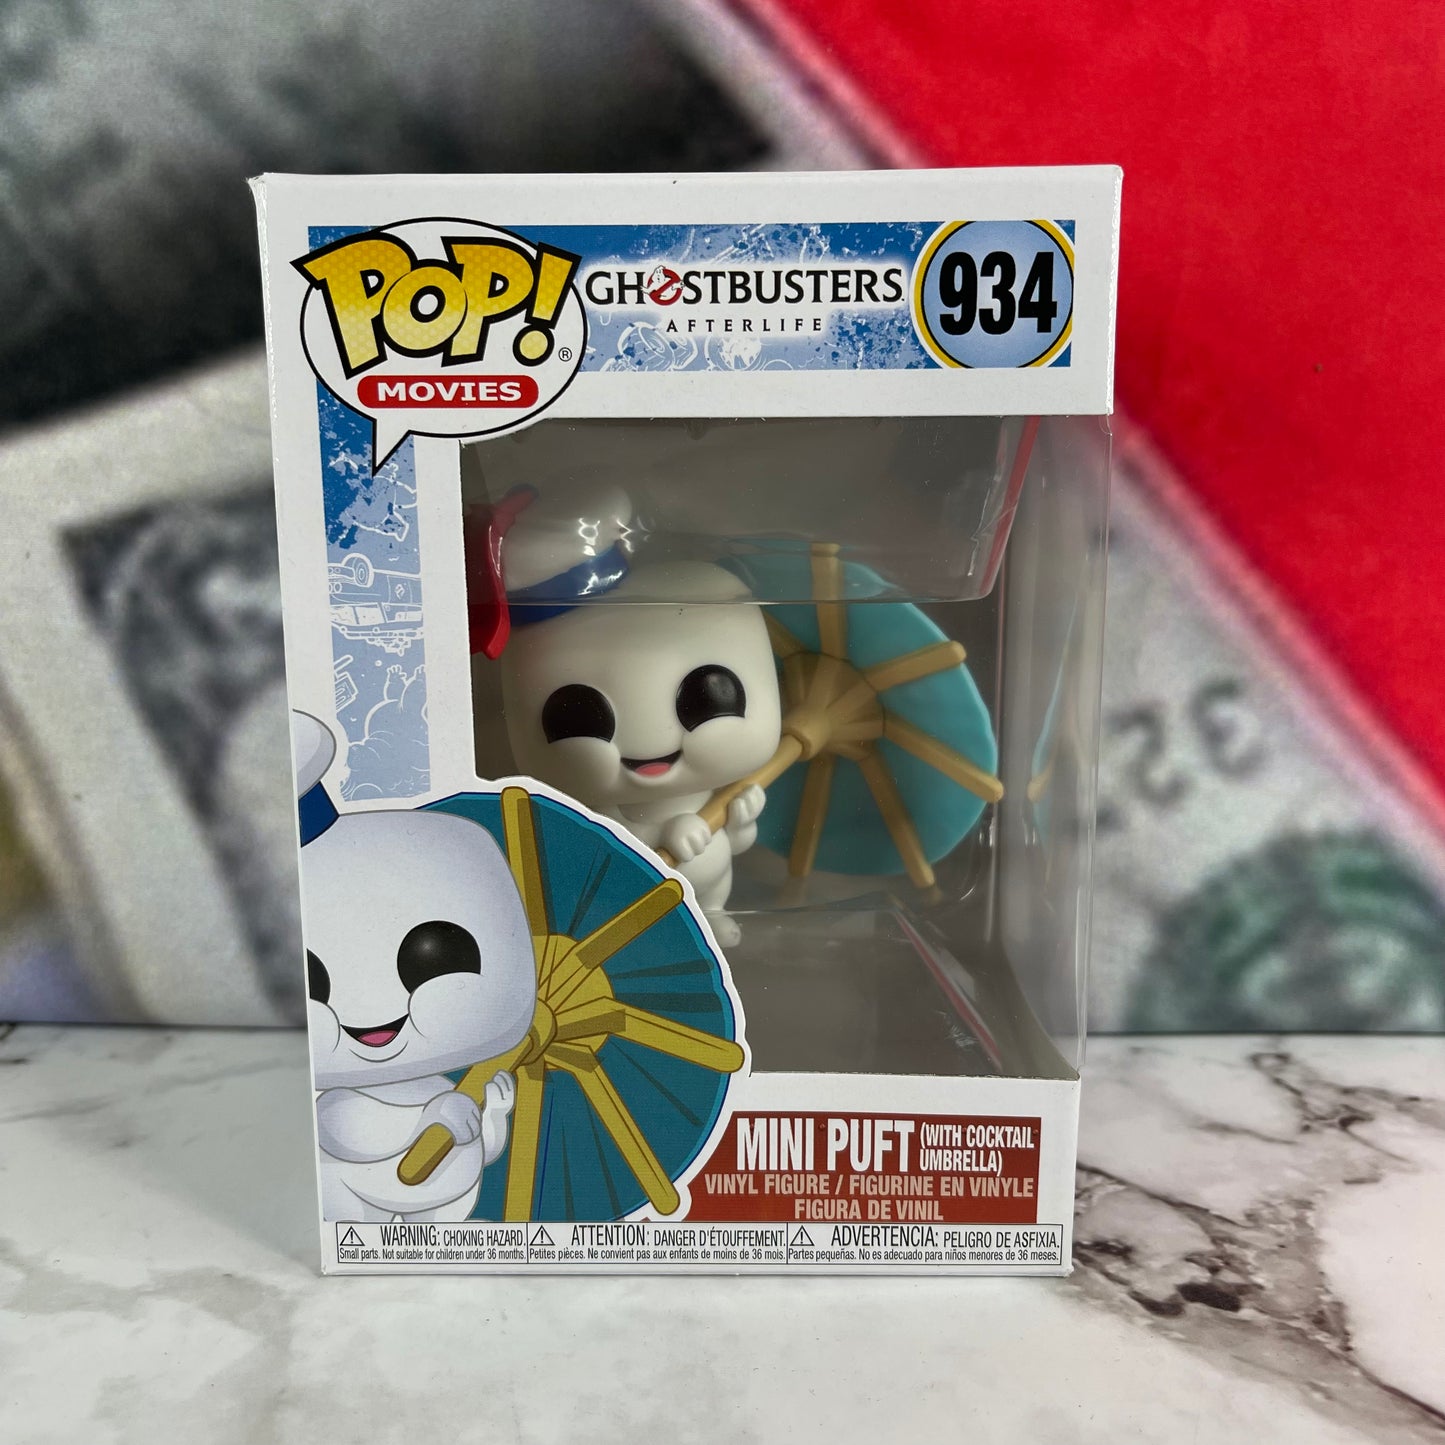 Ghostbusters: Afterlife Funko Pop! Mini Puft (with Cocktail Umbrella) #934